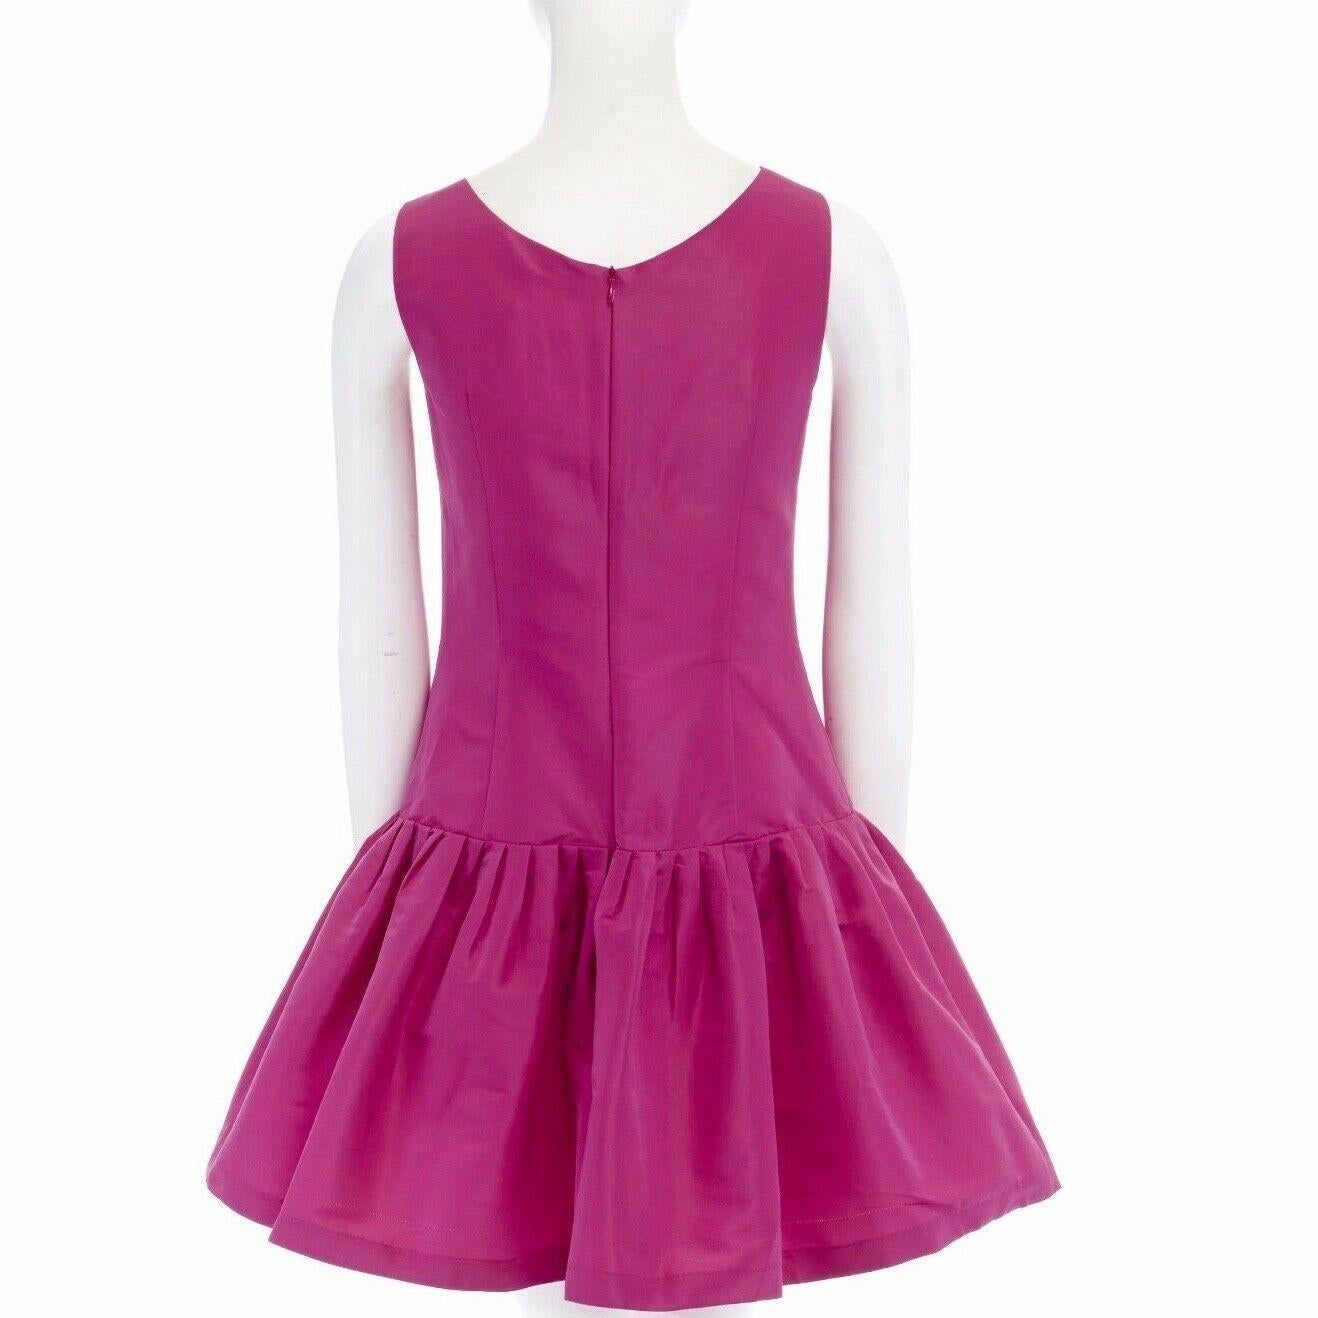 new RED VALENTINO fuschia pink pleated flared skirt cocktail dress IT42 M

RED VALENTINO
Polyester, acetate, modal . Fuschia pink . Wide round neckline . Sleeveless . Fitted at low waist . Pleated flared skirt . Zip back closure . Fully lined .